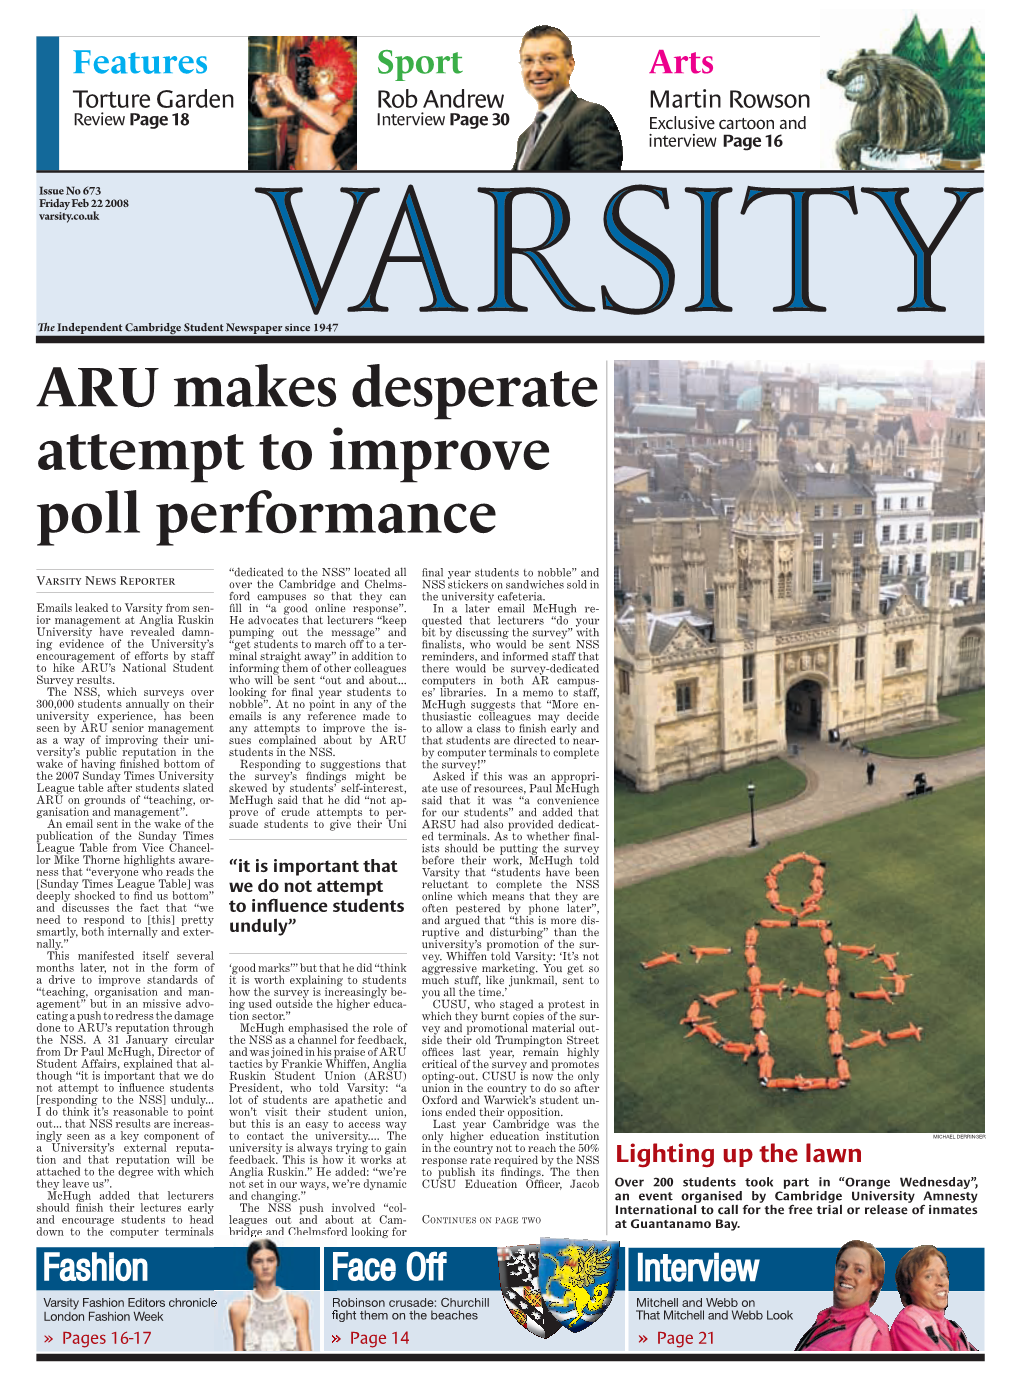 ARU Makes Desperate Attempt to Improve Poll Performance